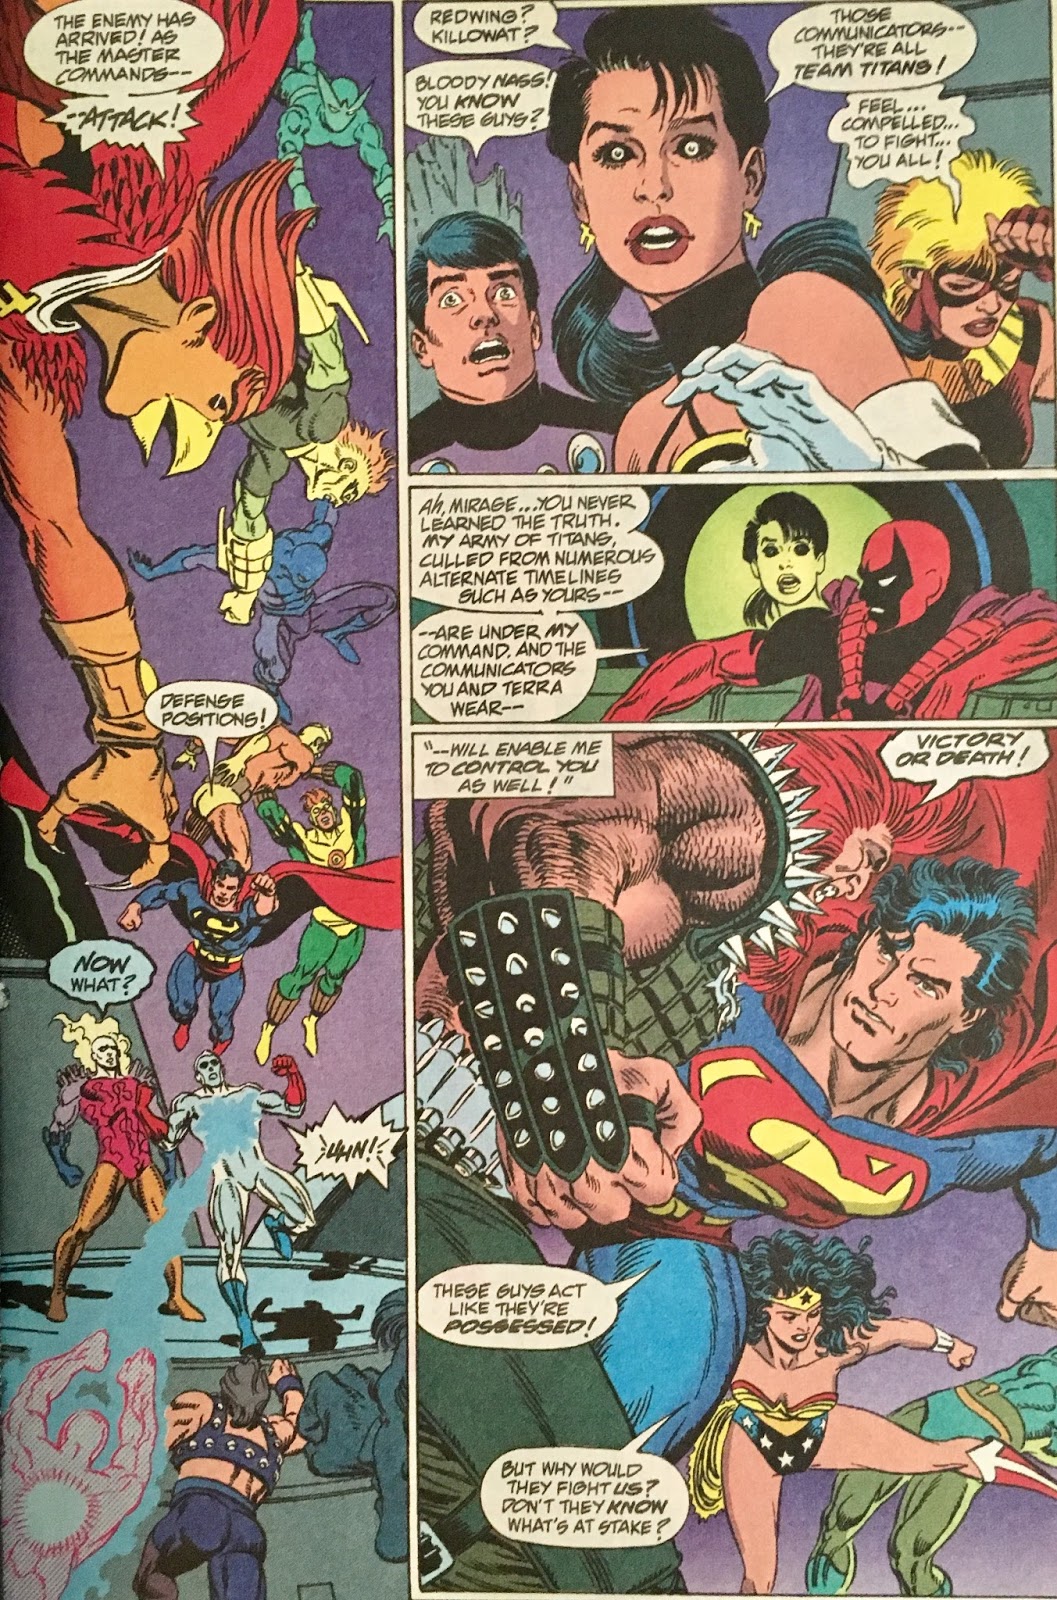 Chris is on Infinite Earths: Zero Hour: Crisis in Time #2 (1994)